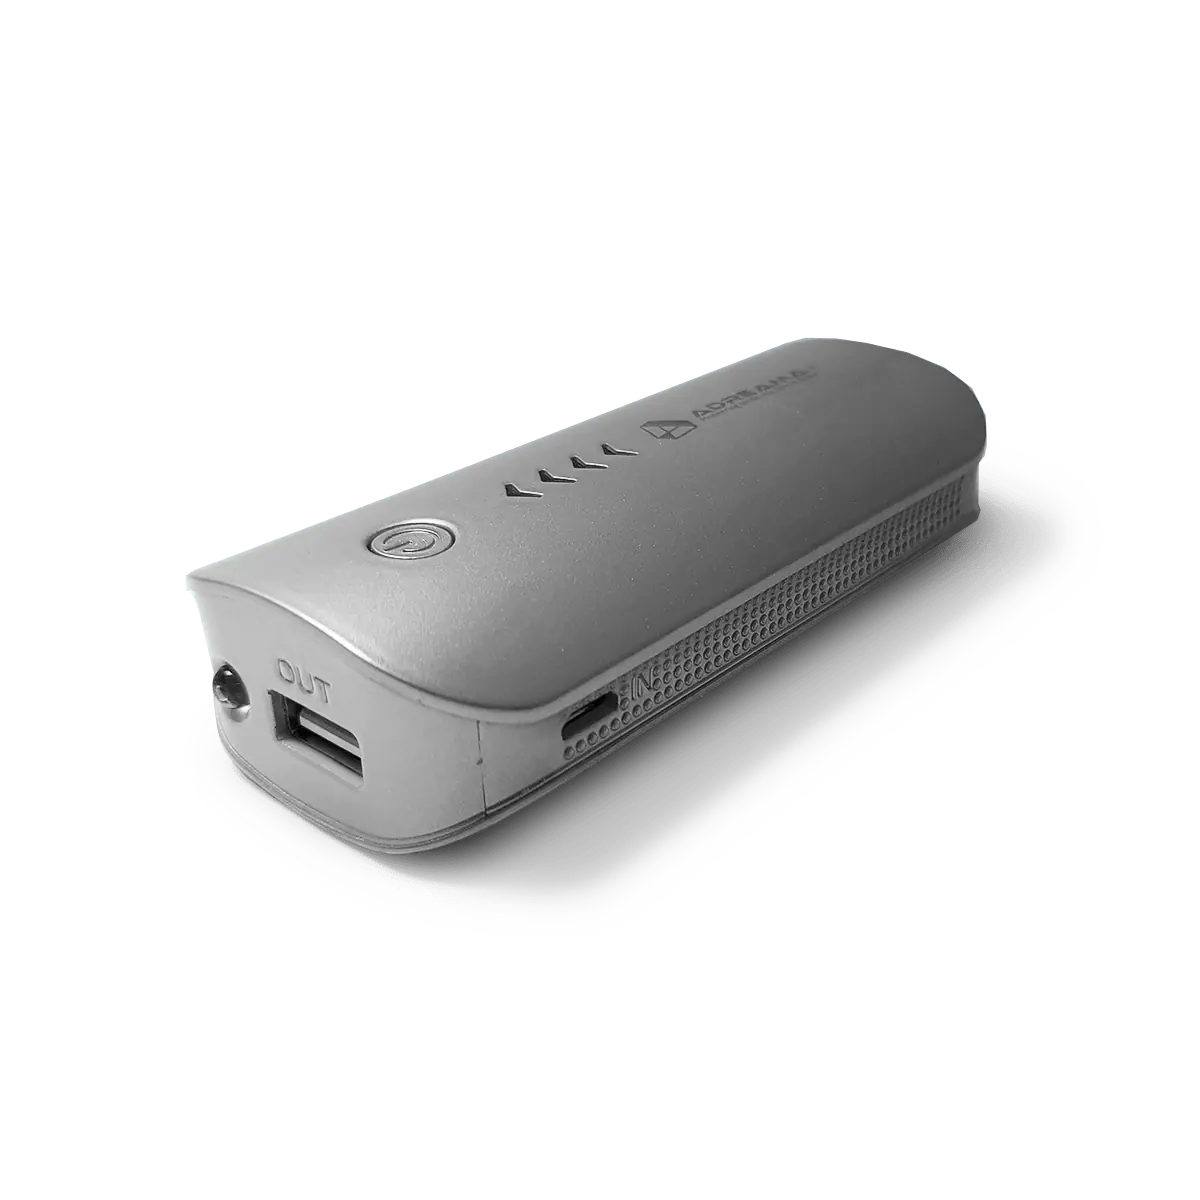 6000mAh Power Bank, Portable Charger with USB-A Port, Silver, Three-quarter Angle View.